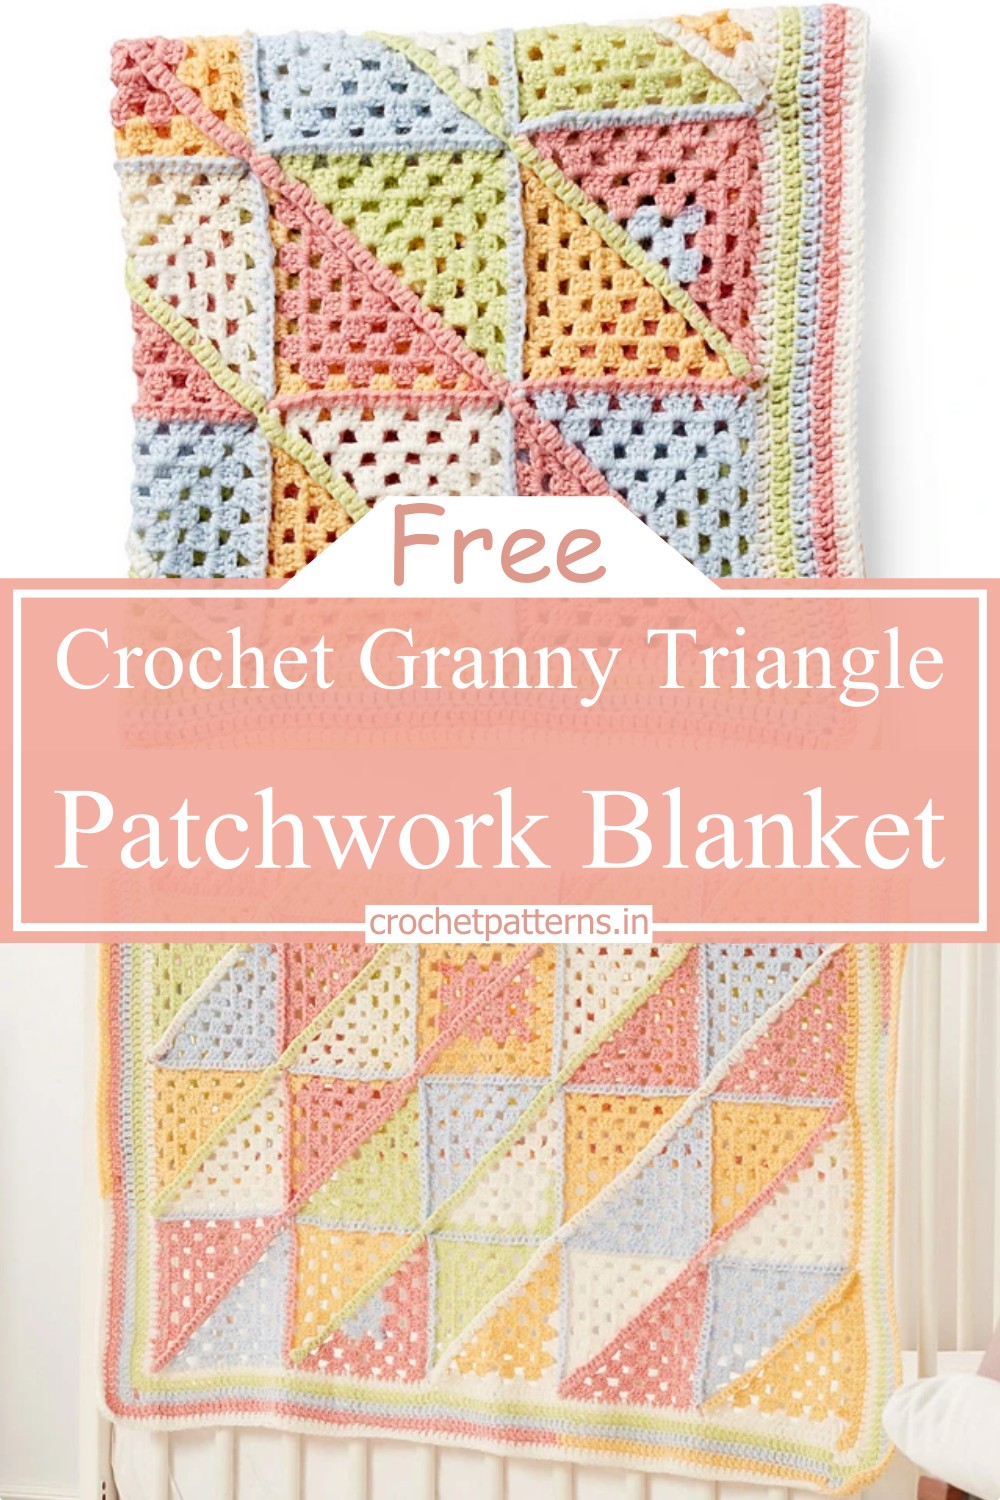 Granny Triangle Patchwork Blanket